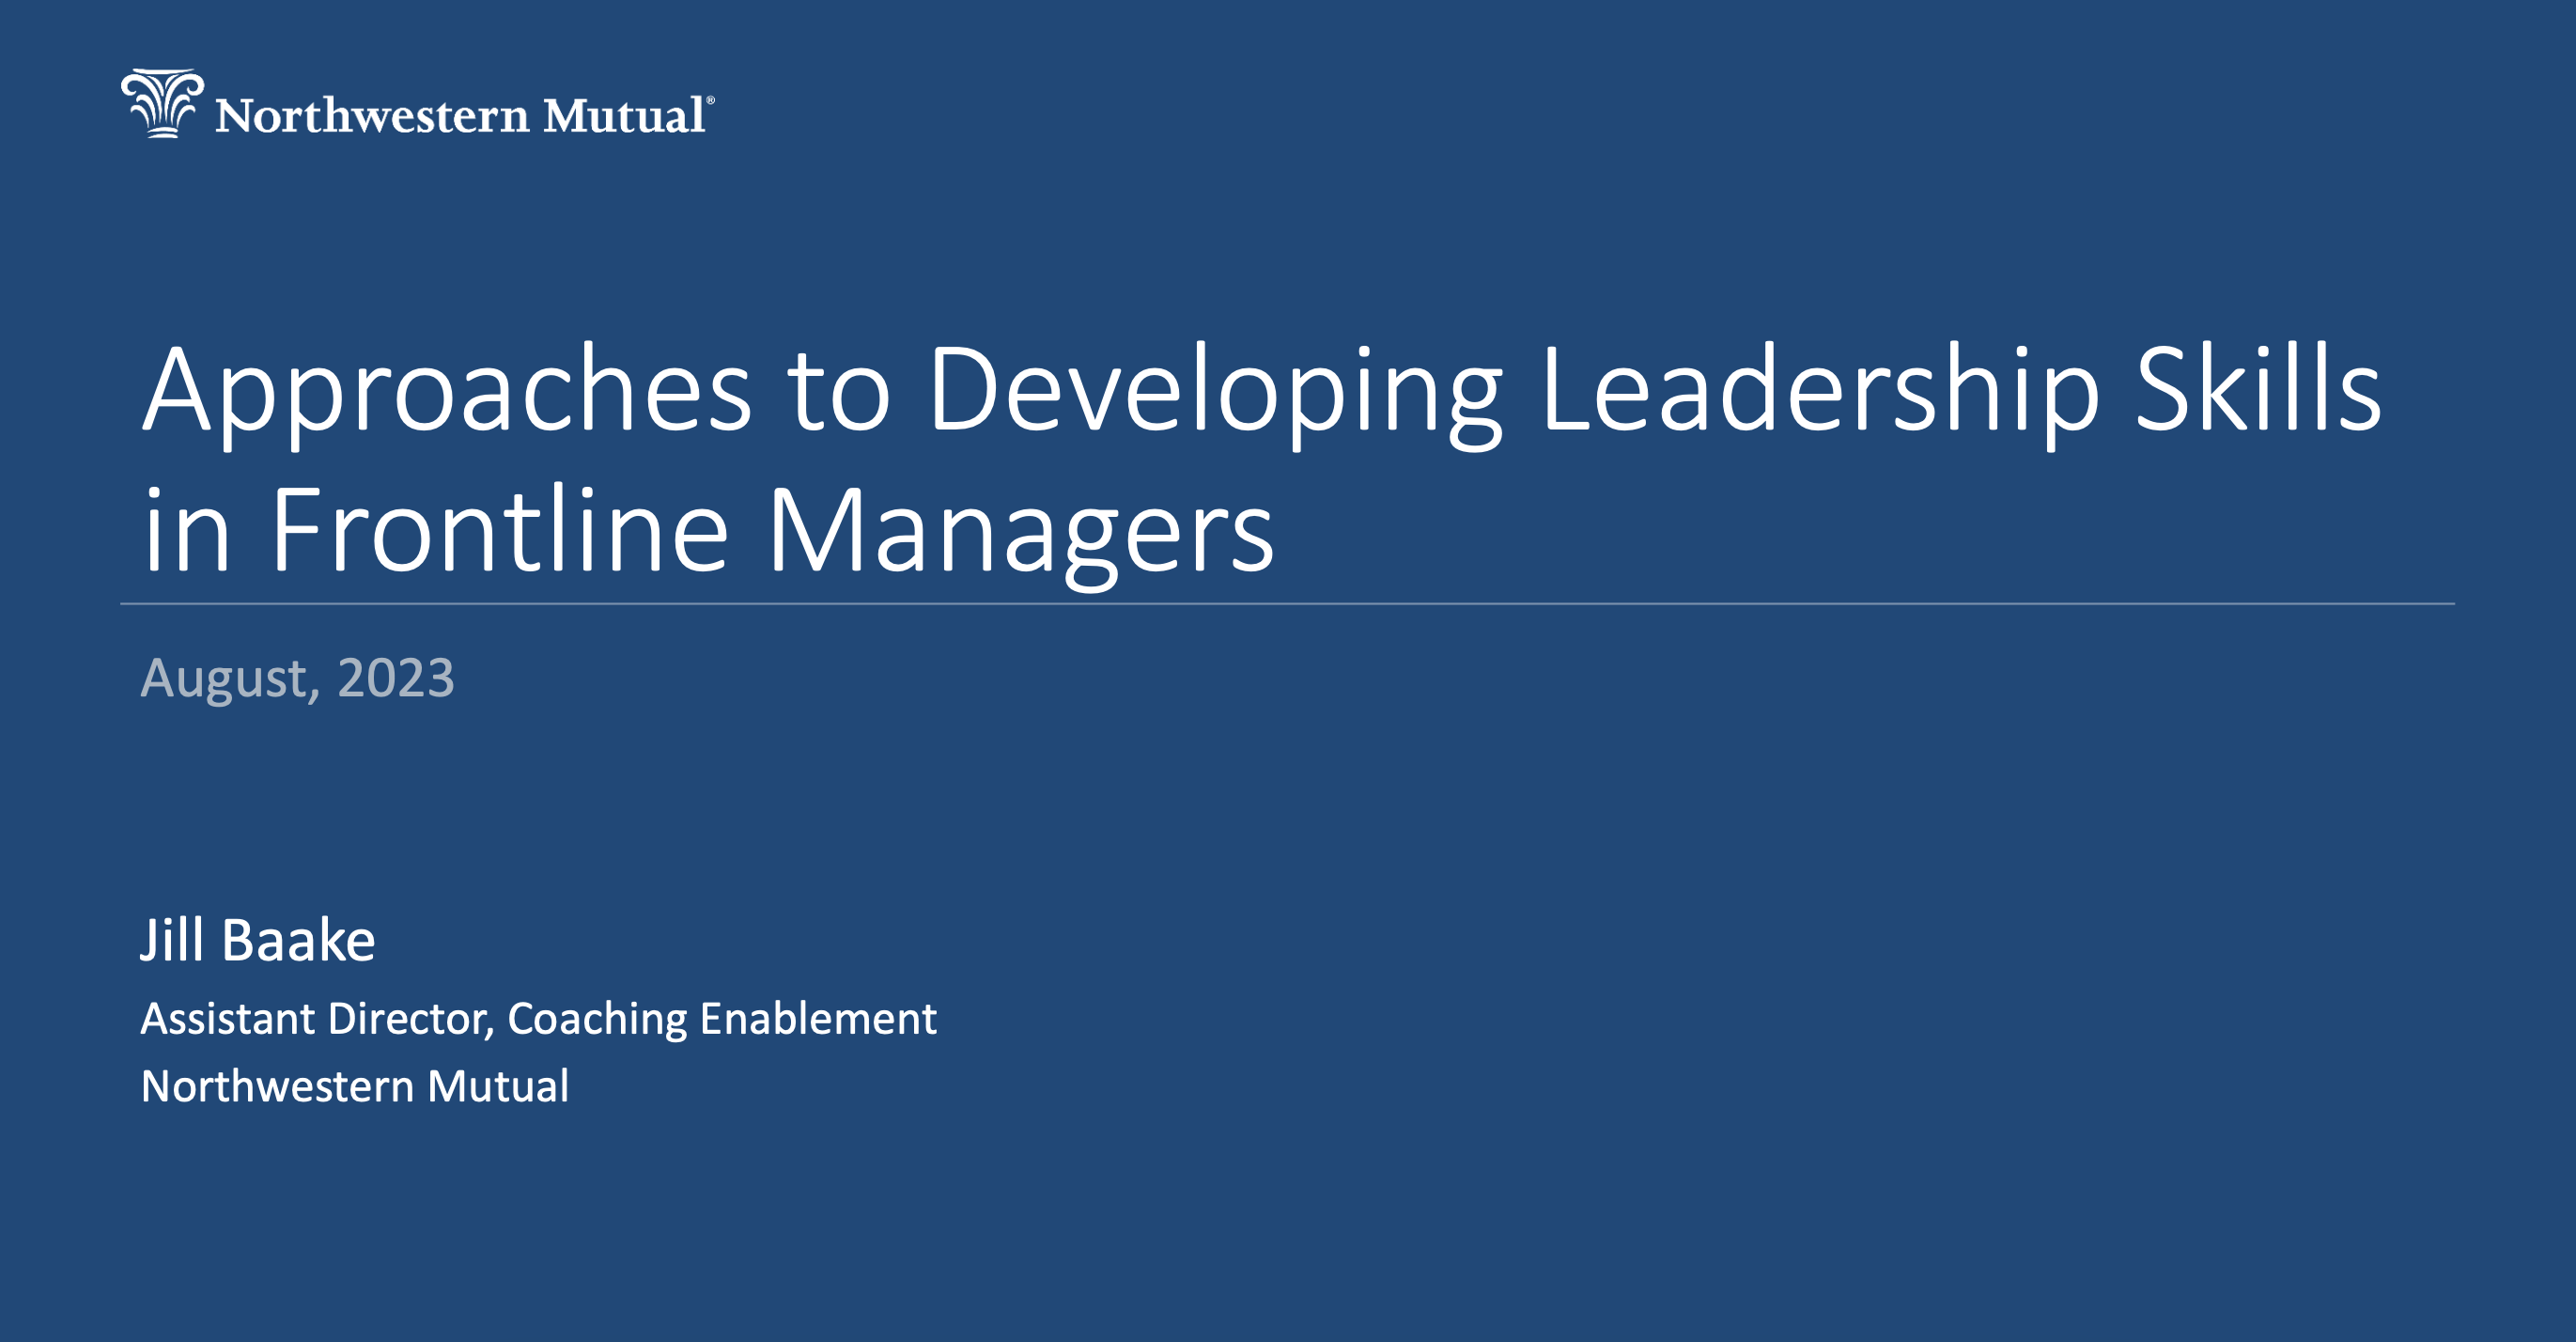 4. Northwestern Mutual Presentation Slides: Approaches to Developing Leadership Skills in Frontline Managers thumbnail